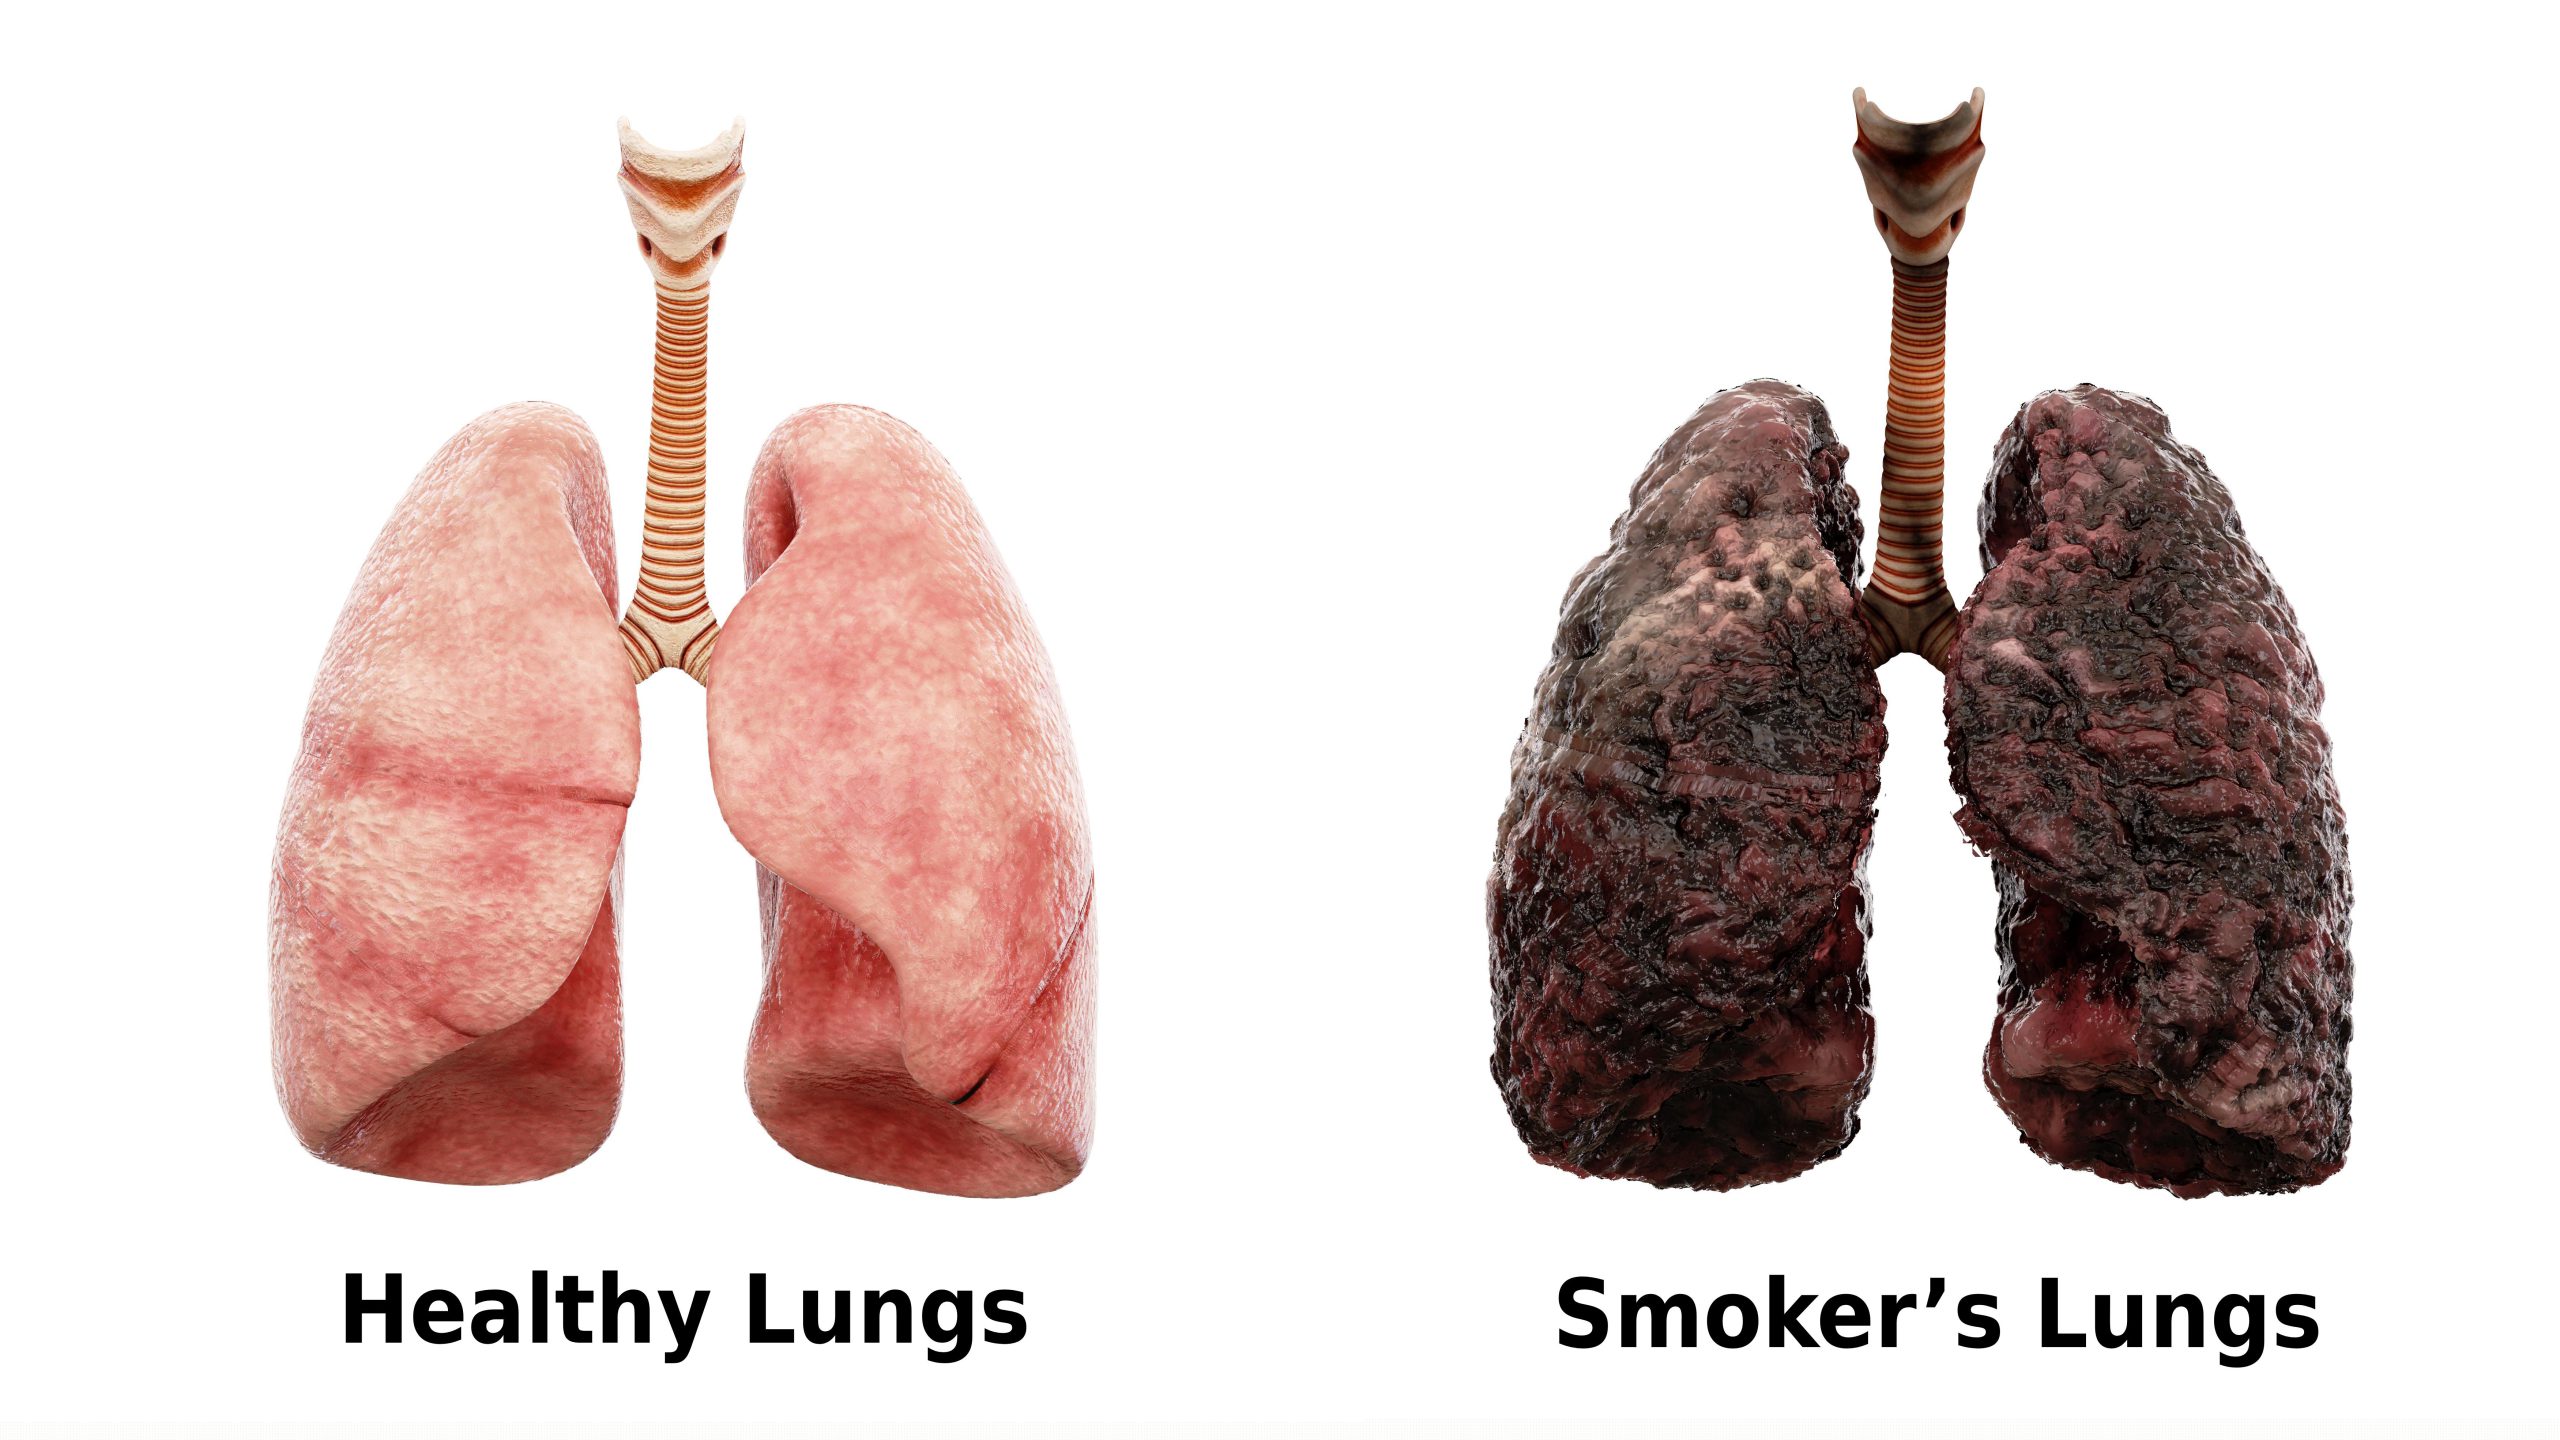 Healthy Lung vs Smoker’s Lung